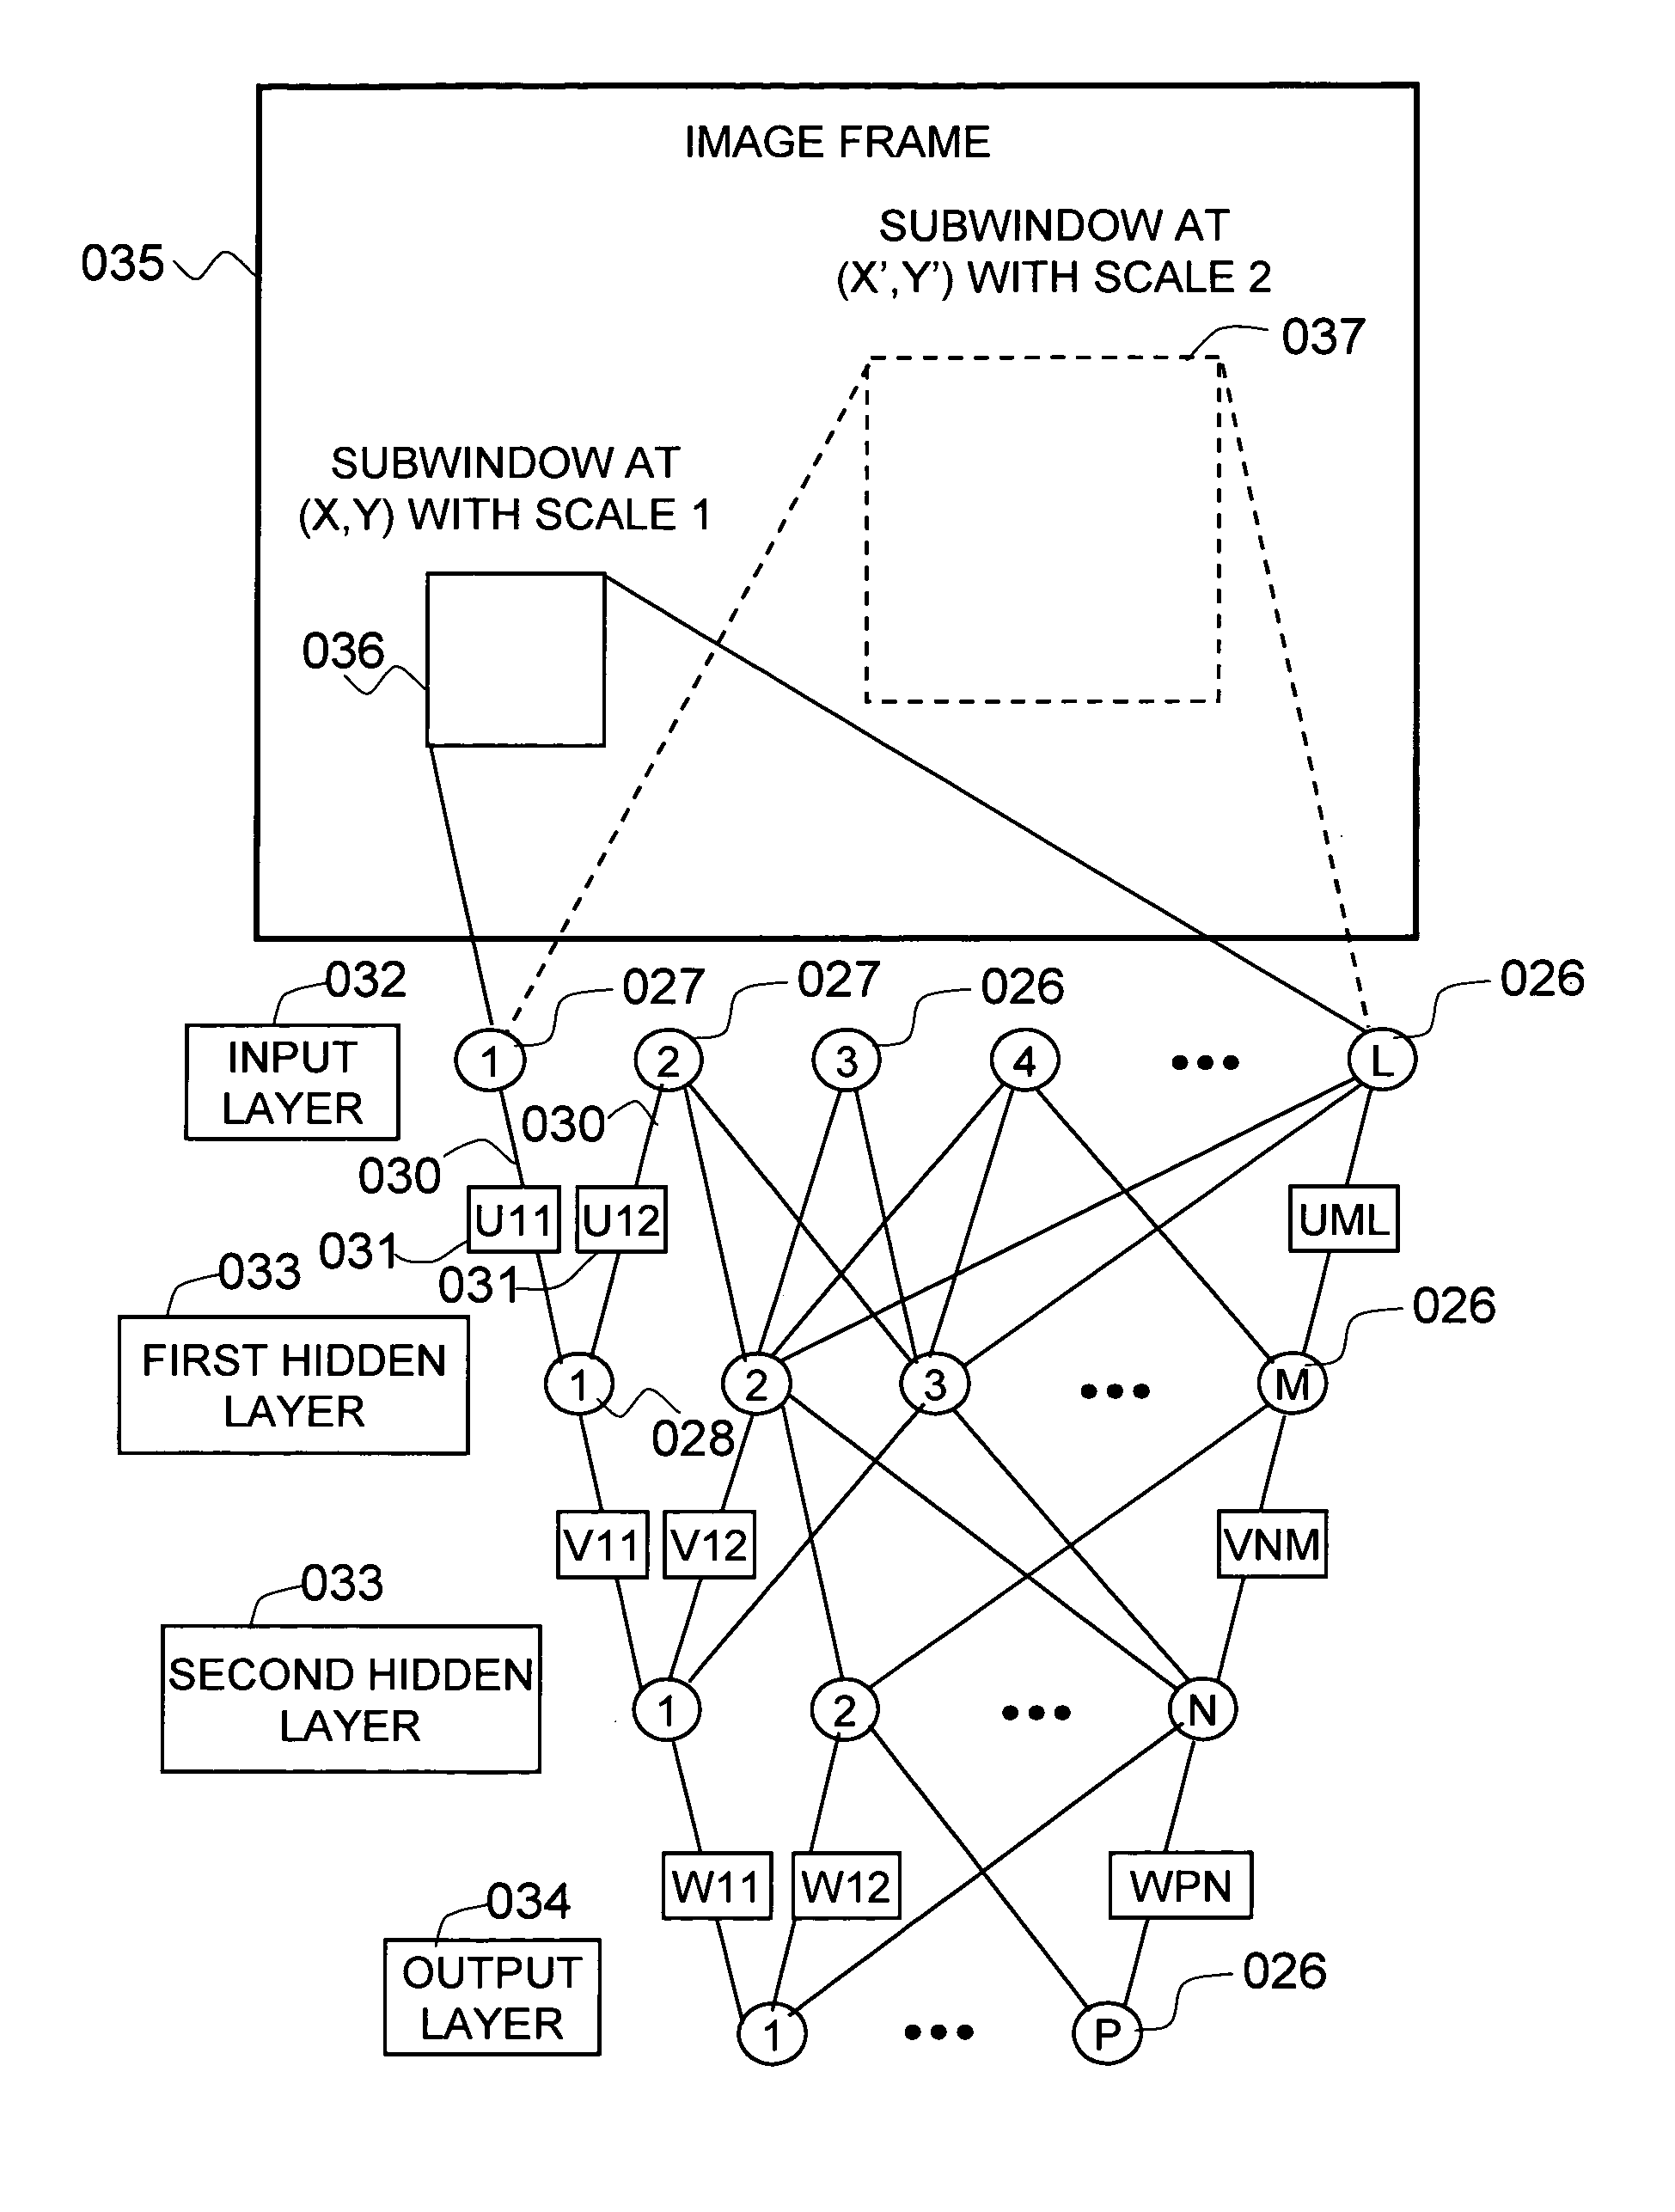 Apparatus and method for hardware implementation of object recognition from an image stream using artificial neural network